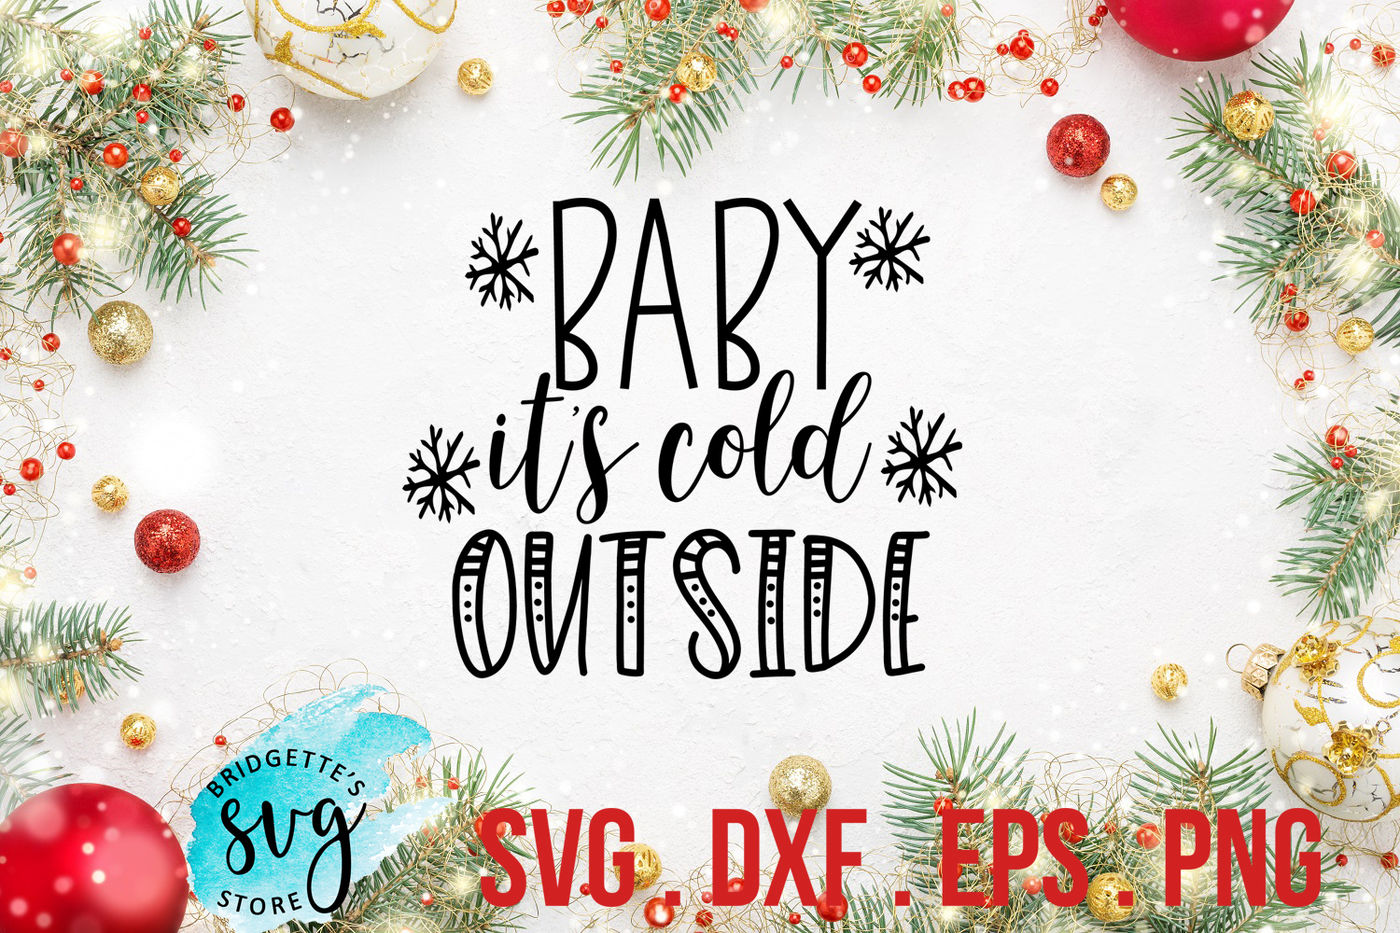 Download Baby it's Cold Outside SVG, DXF, PNG, EPS File By Bridgettes SVG Store | TheHungryJPEG.com